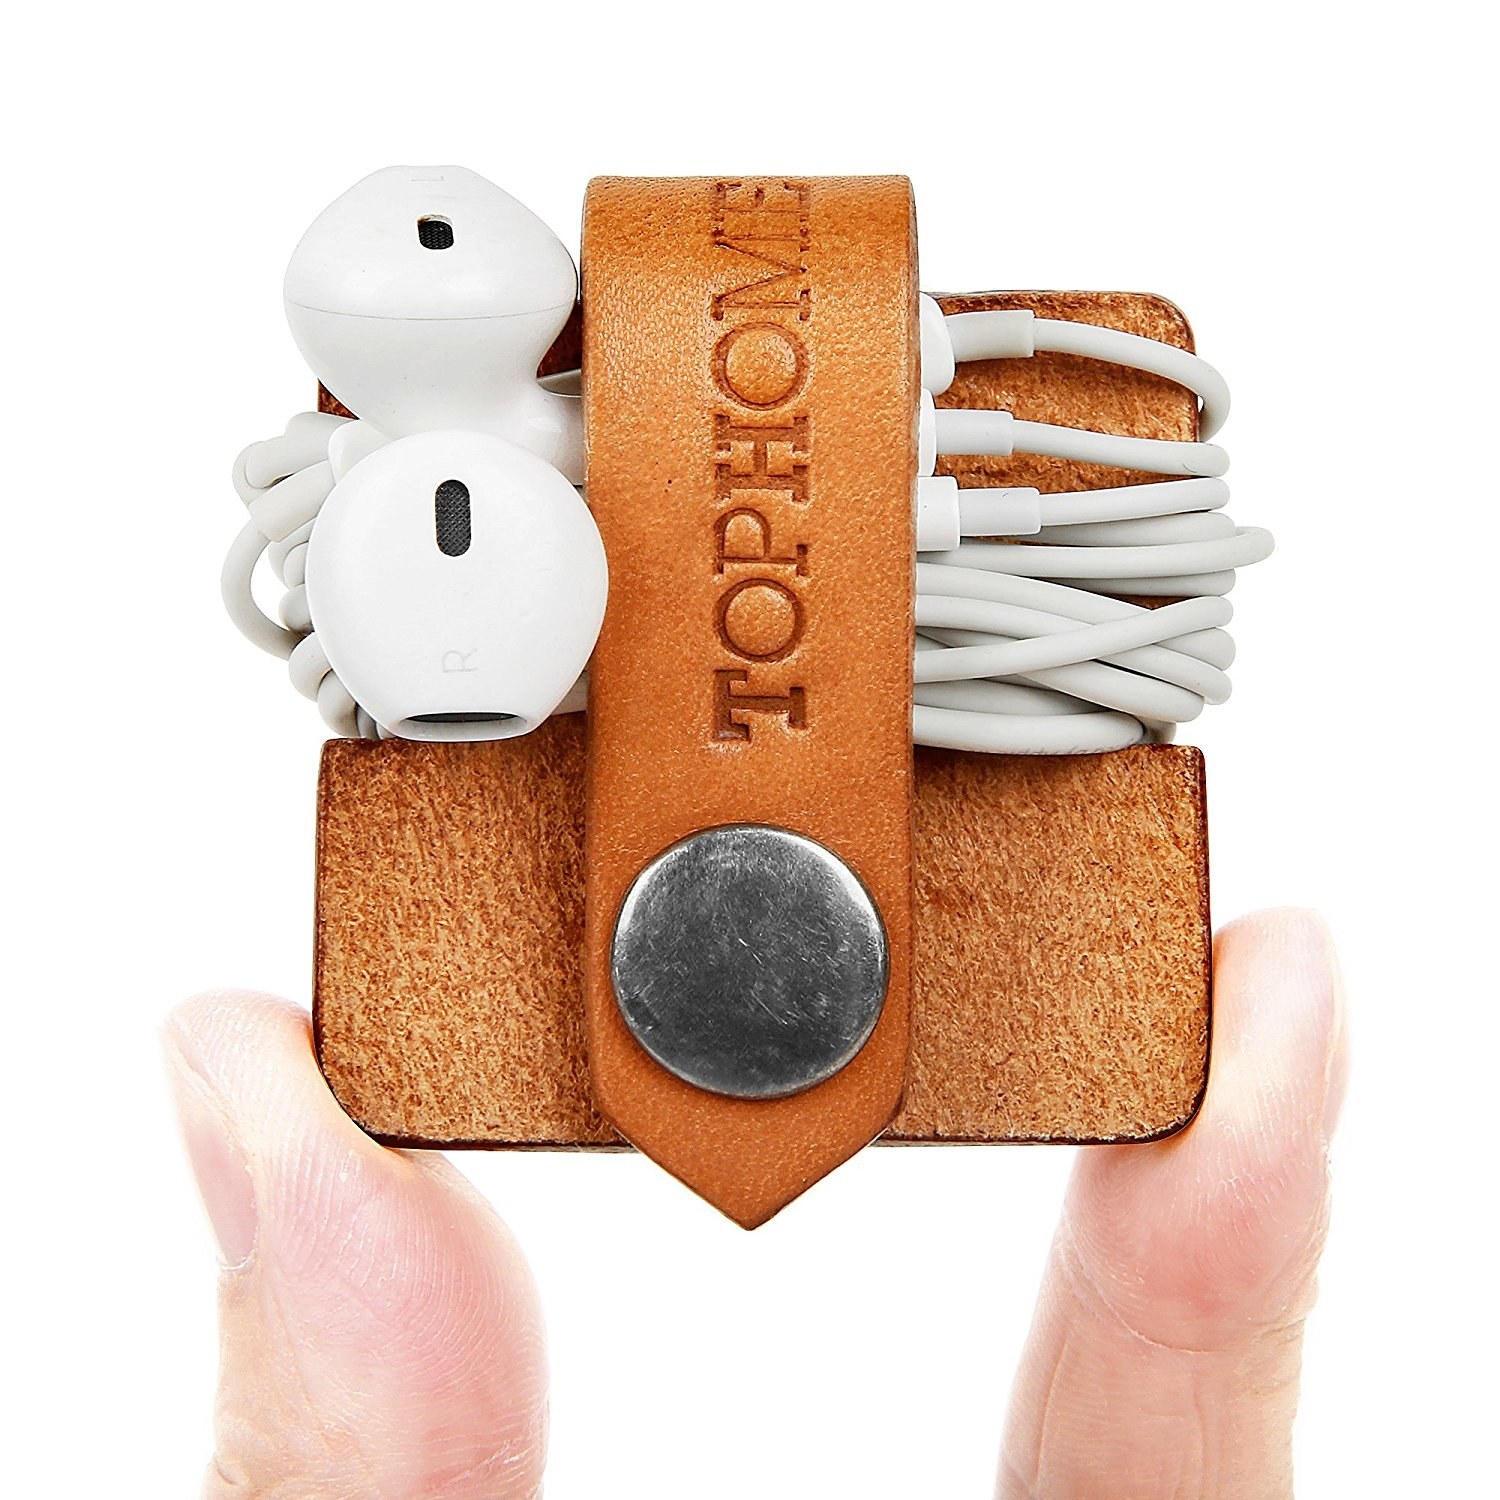 Hand holding the brown organizer with earbuds wrapped around it